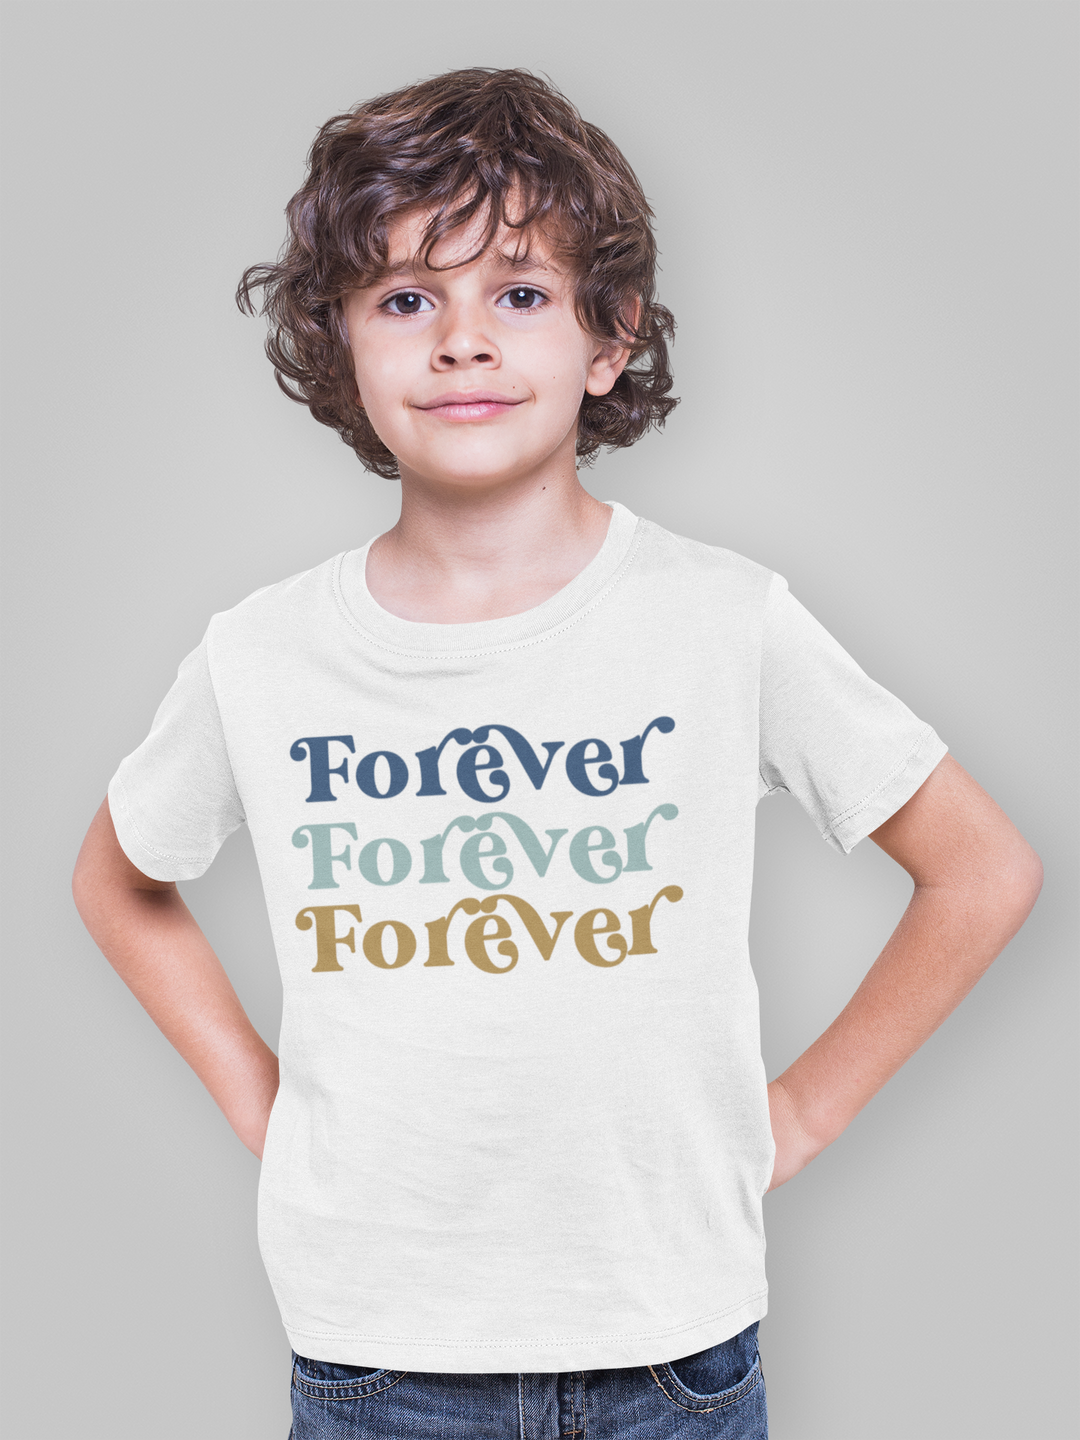 Forever in blue brown. T-shirt or toddlers and kids. - TeesForToddlersandKids -  t-shirt - holidays, Love - forever-in-blue-brown-t-shirt-or-toddlers-and-kids